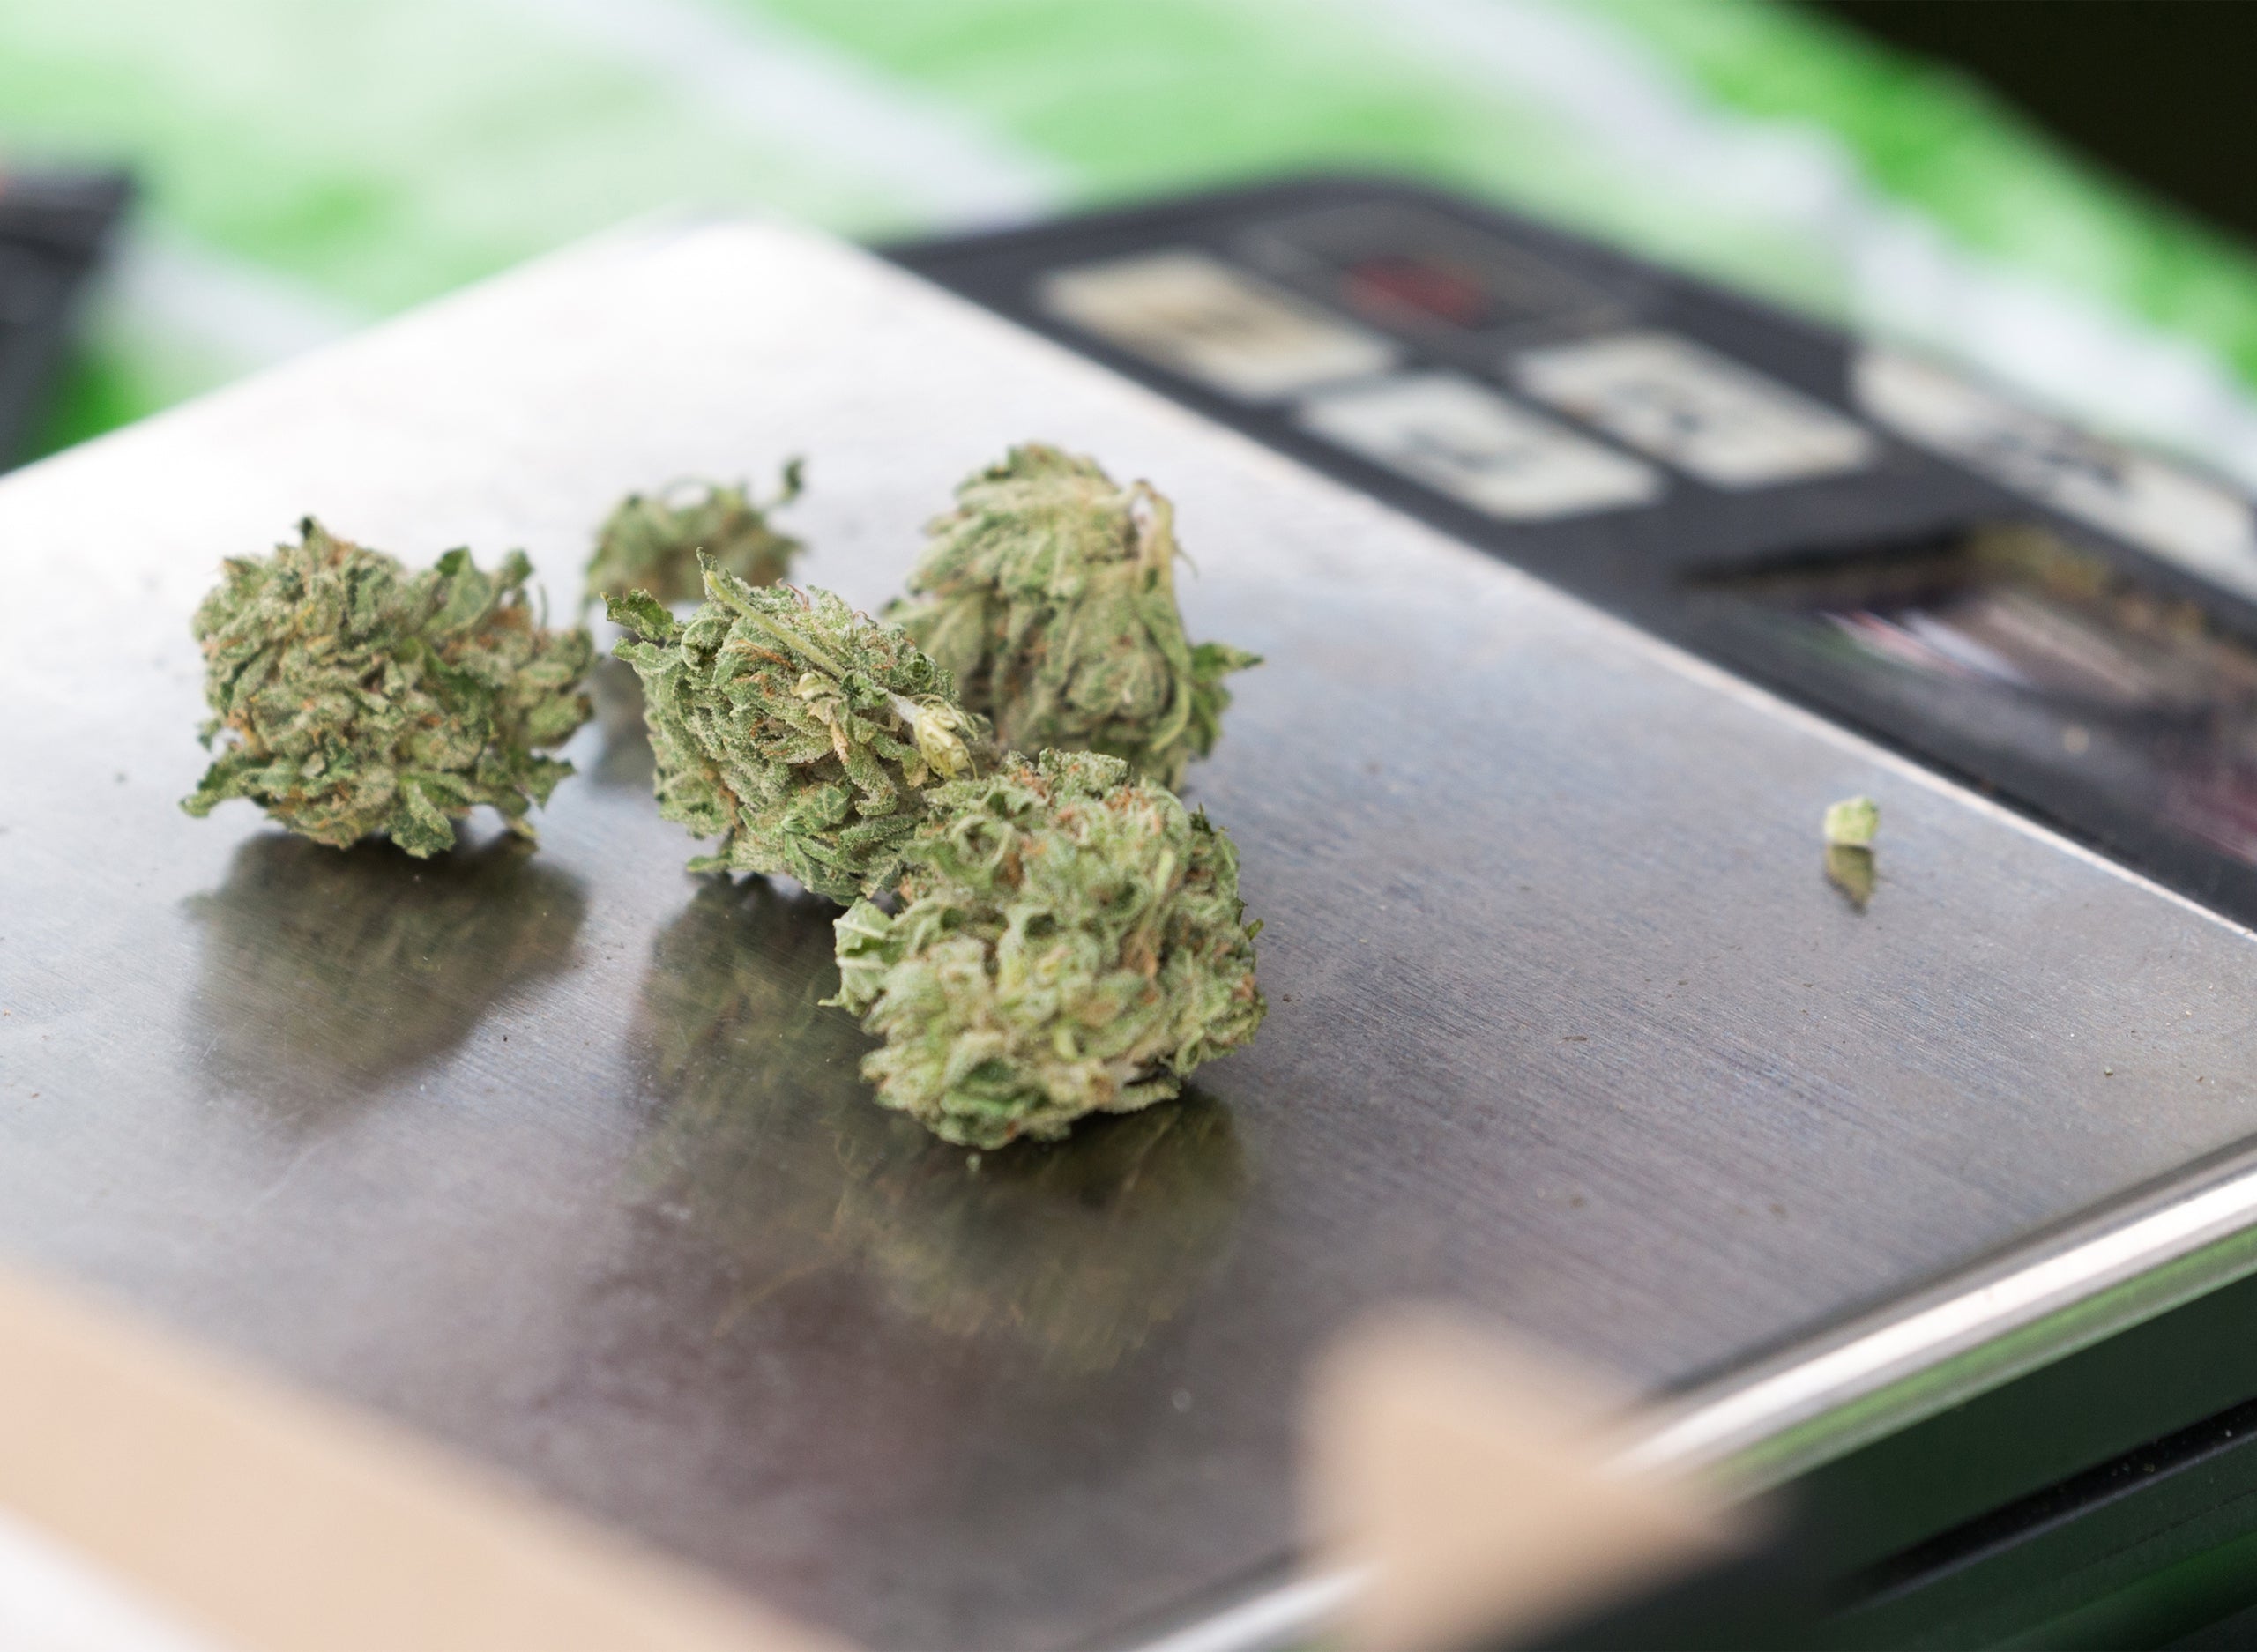 How Much is A Gram, Eighth, Ounce, or Pound of Weed?